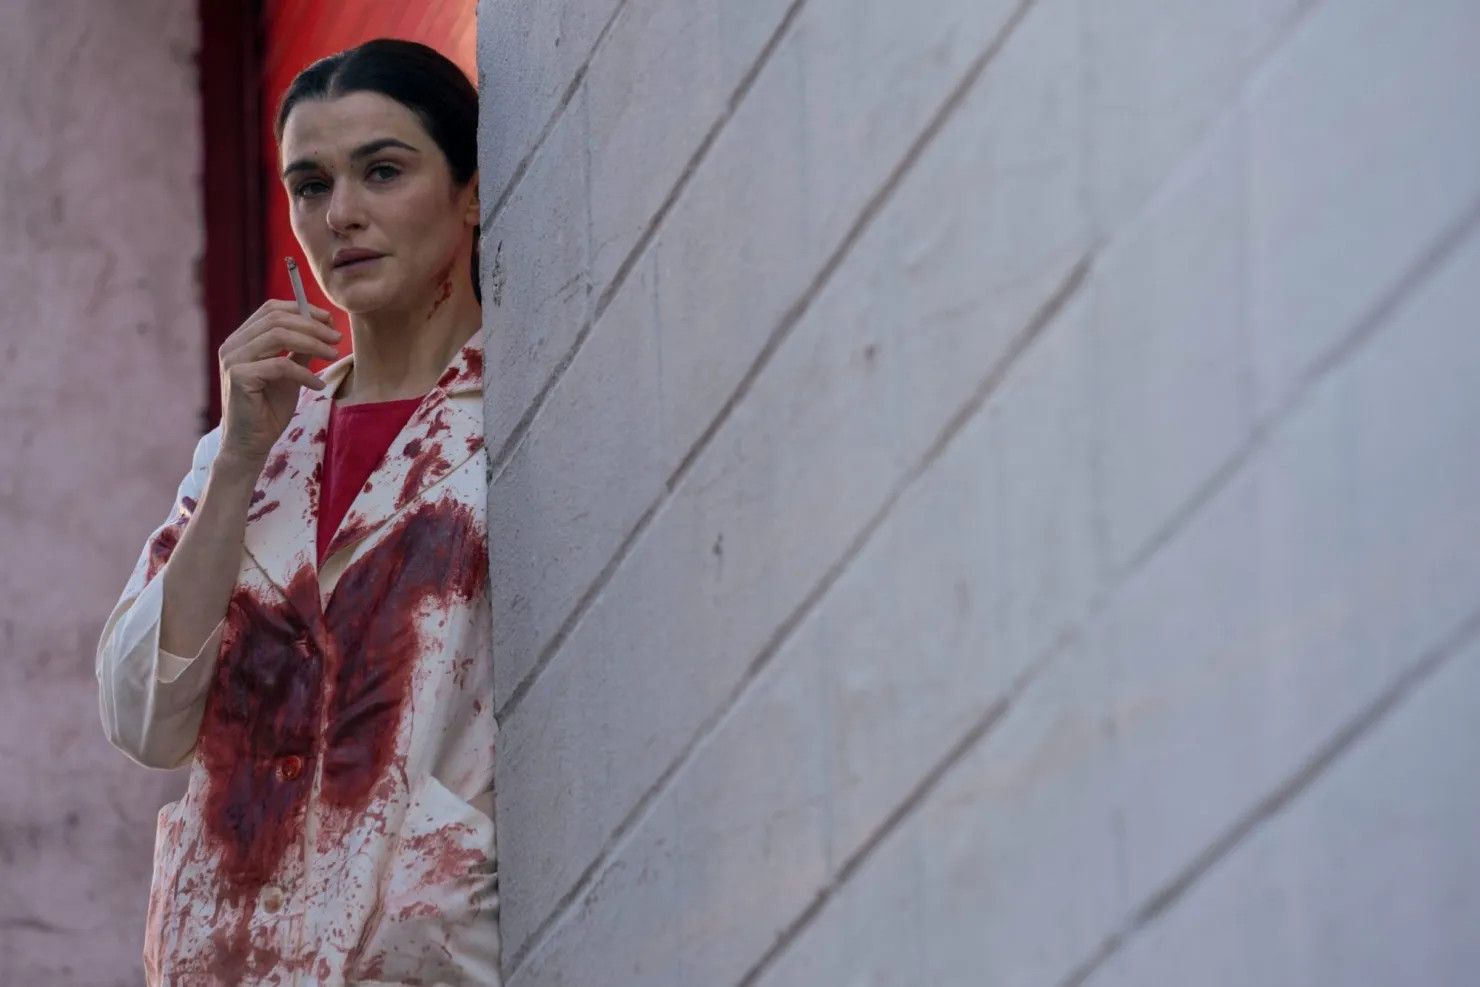 Rachel Weisz in a blood-soaked doctor's coat standing against a brick wall smoking a cigarette